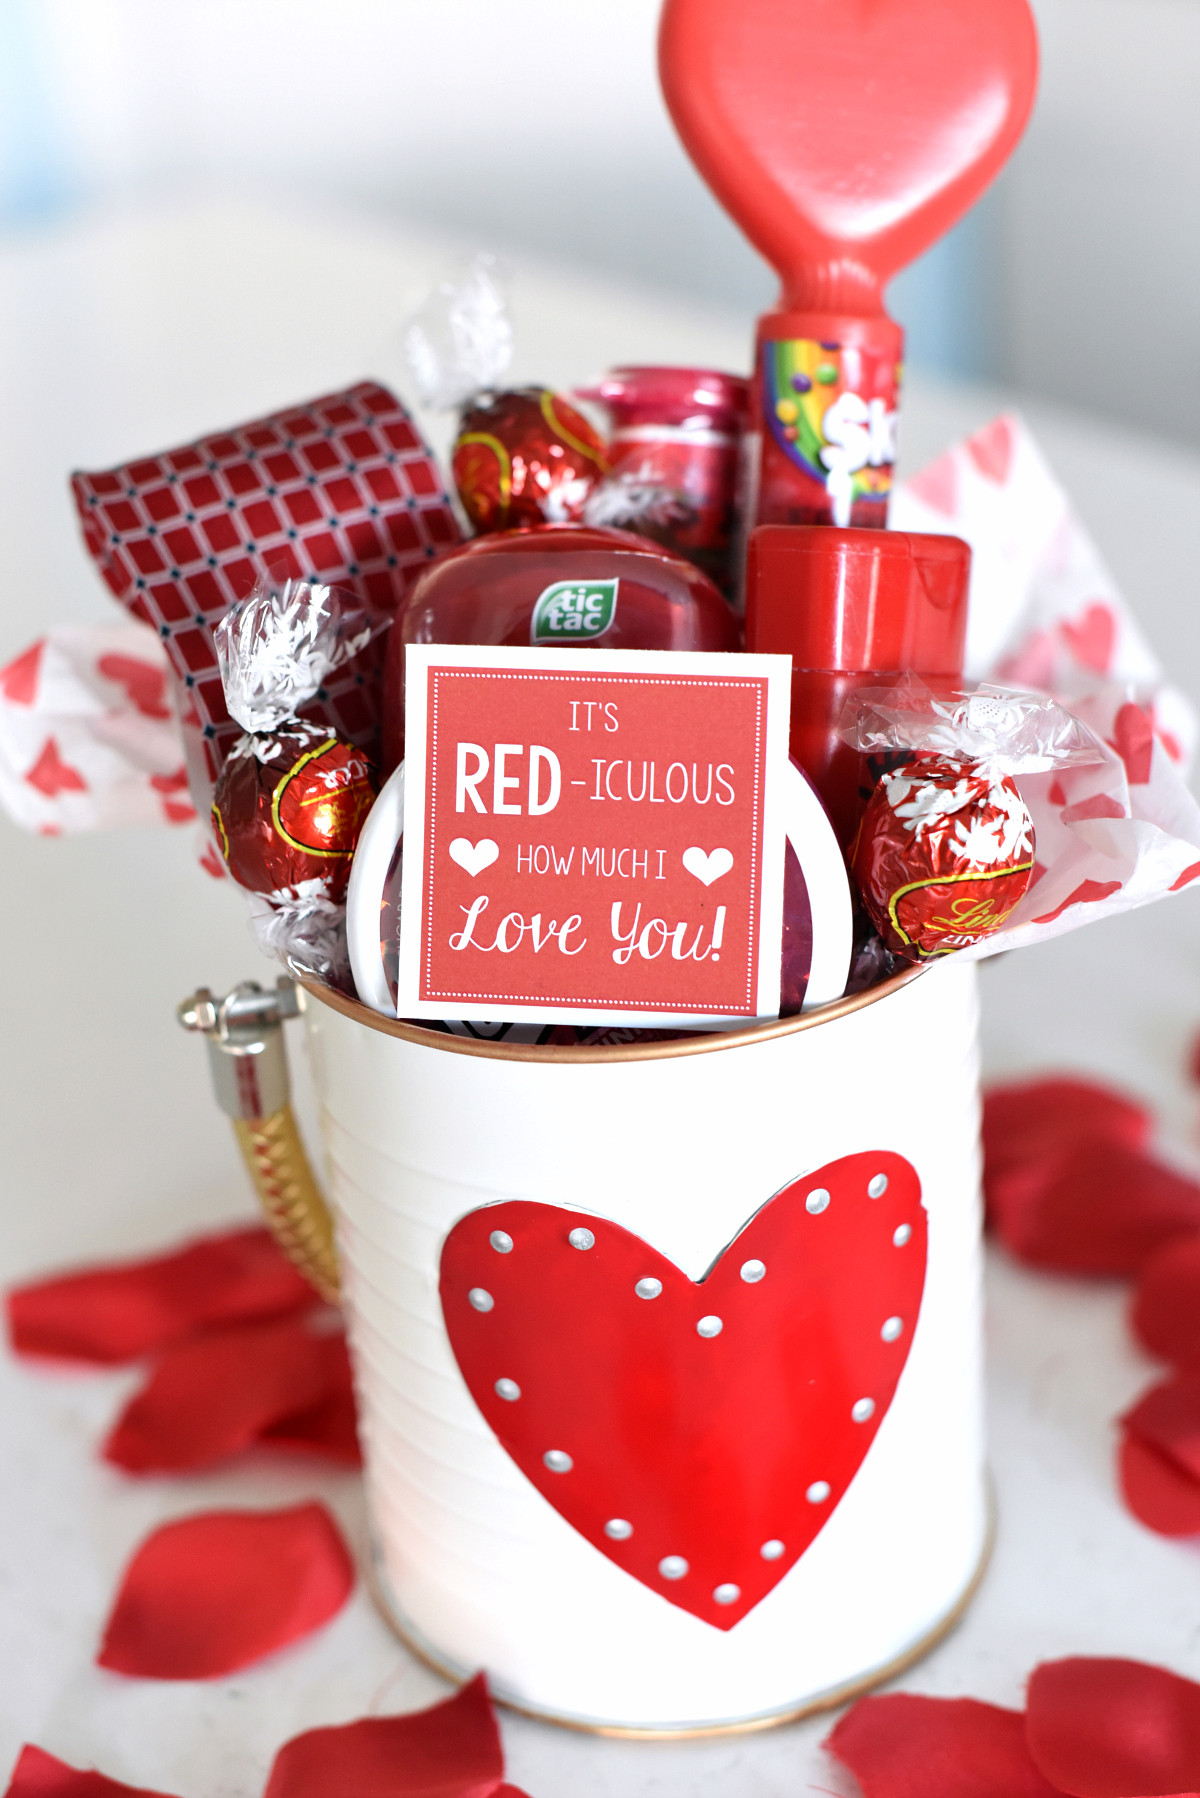 Gift Ideas For Him On Valentine'S Day
 25 DIY Valentine s Day Gift Ideas Teens Will Love